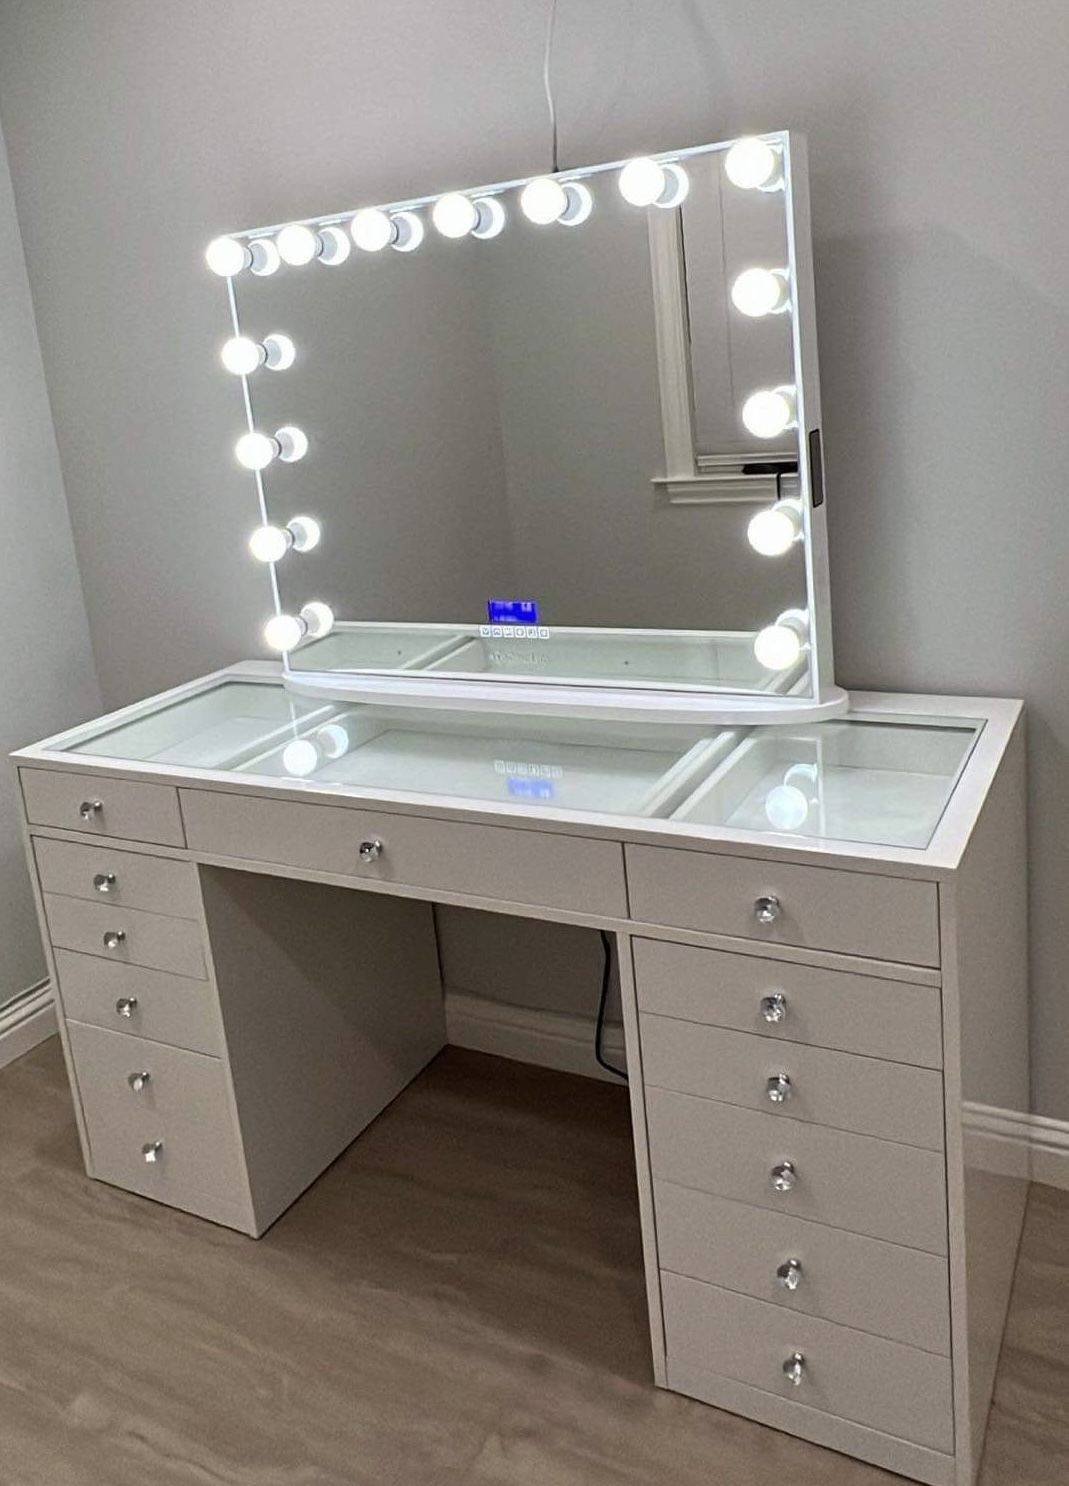 Brand New In sealed box big Vanity set With Bluetooth Led mirror Starts At $750 -$850 